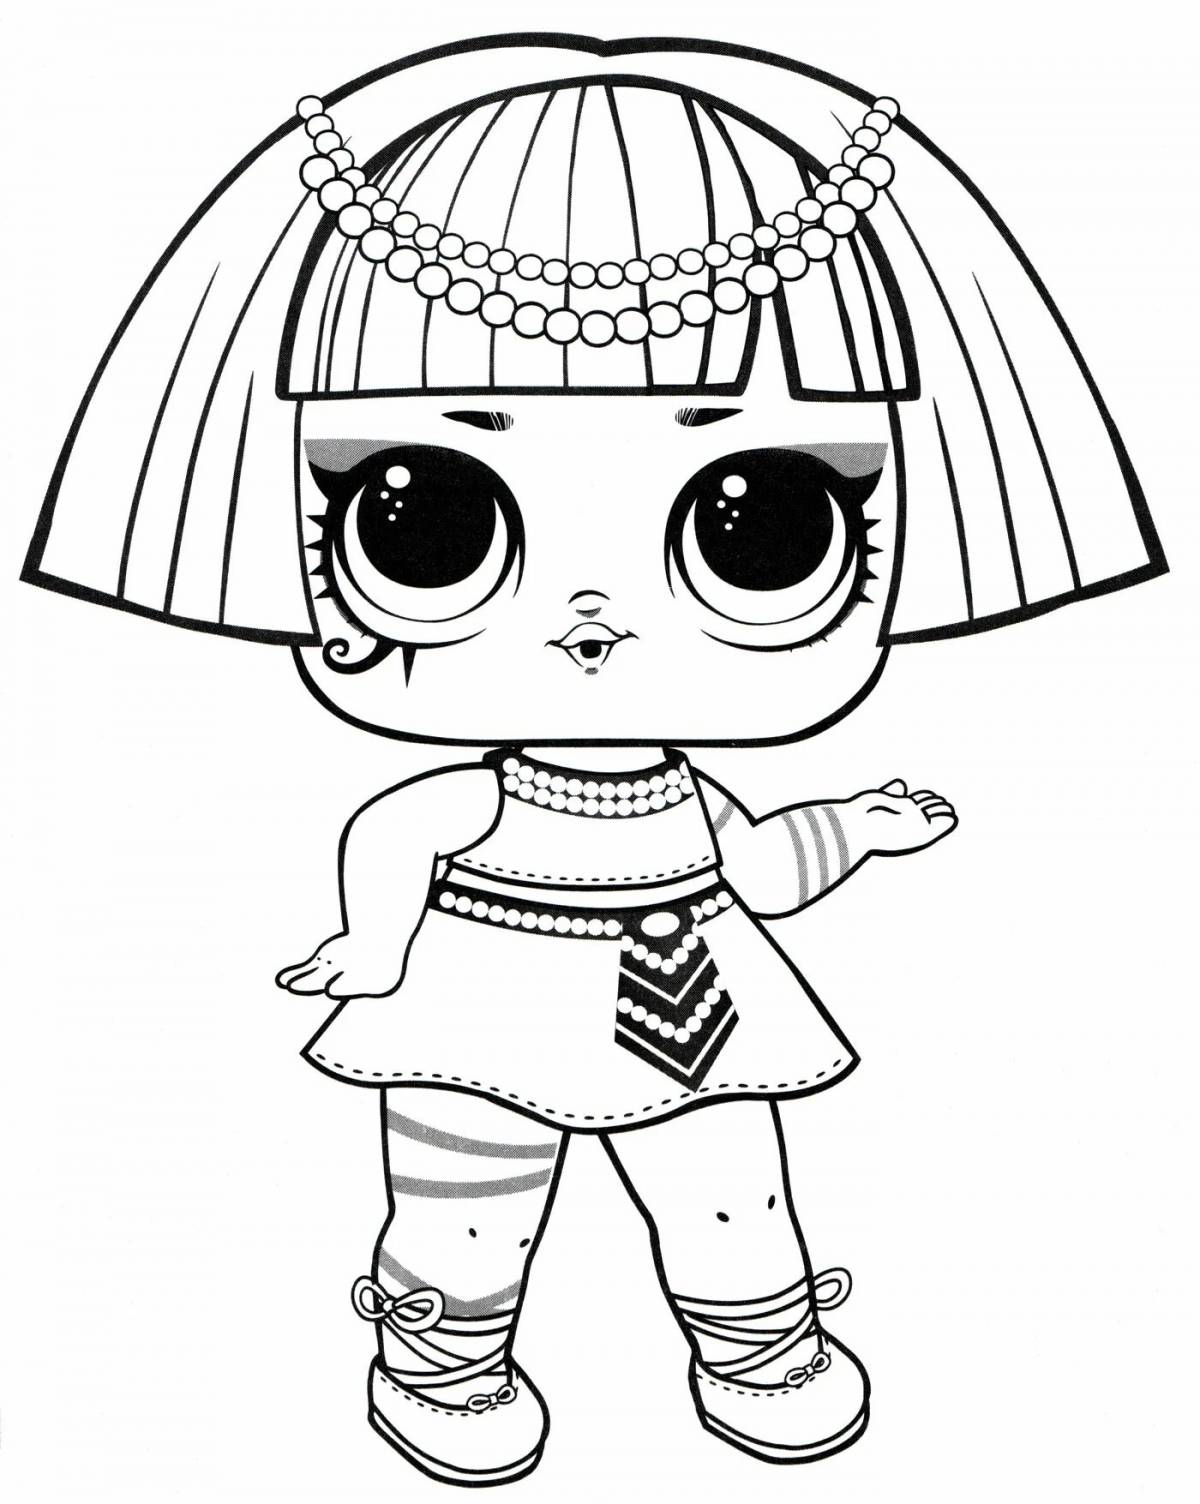 Colorific loo doll coloring page